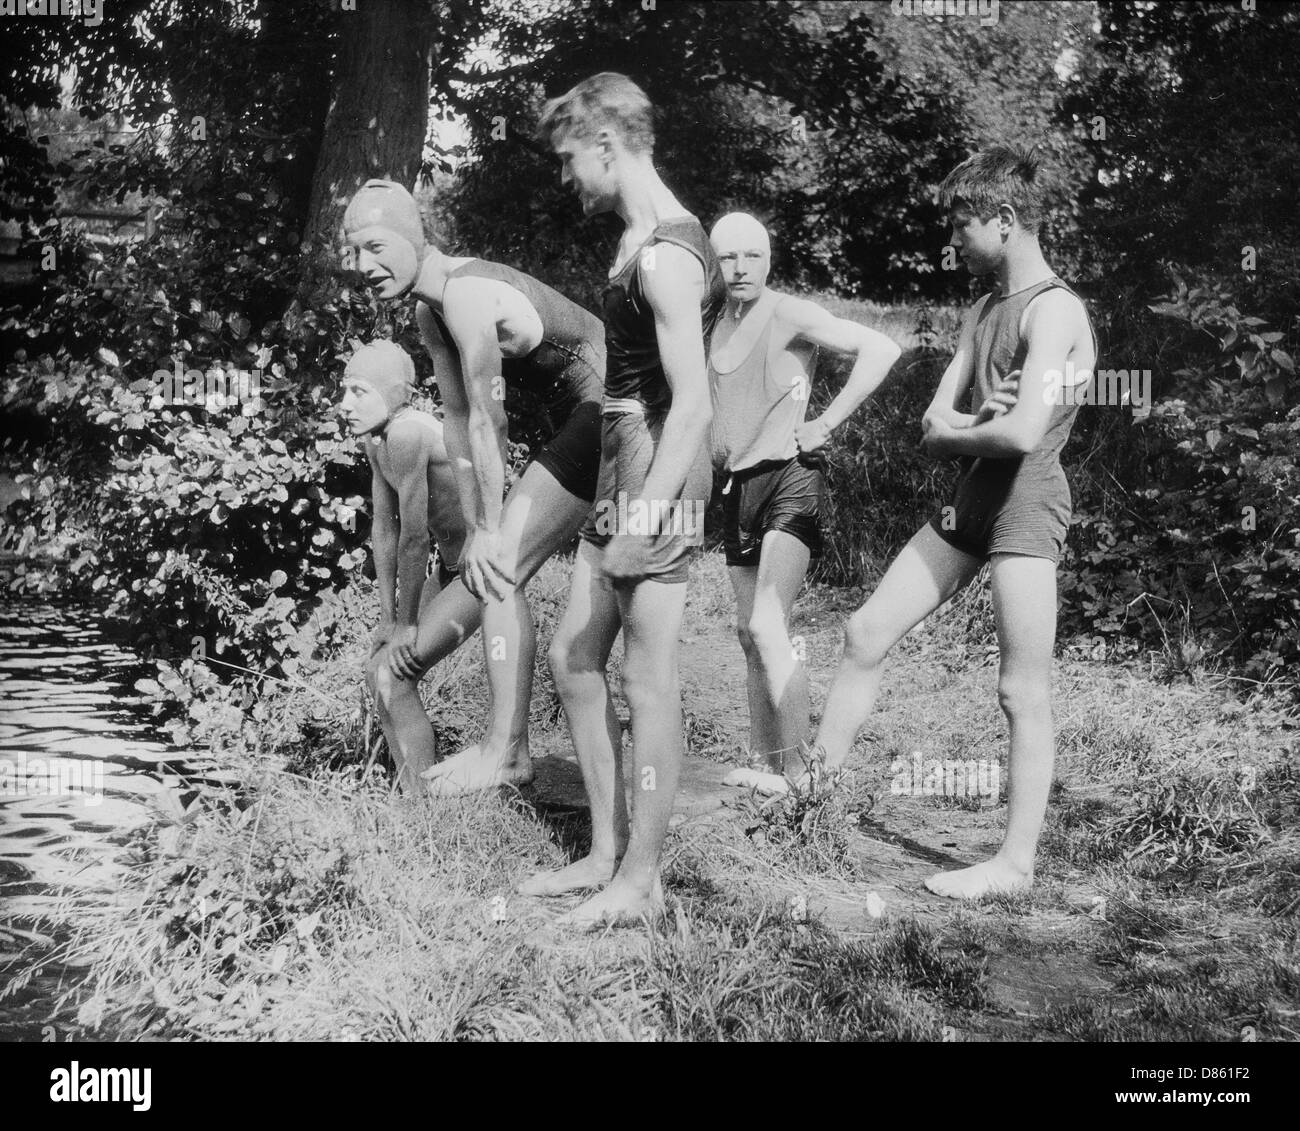 Boys by the river Black and White Stock Photos & Images - Alamy